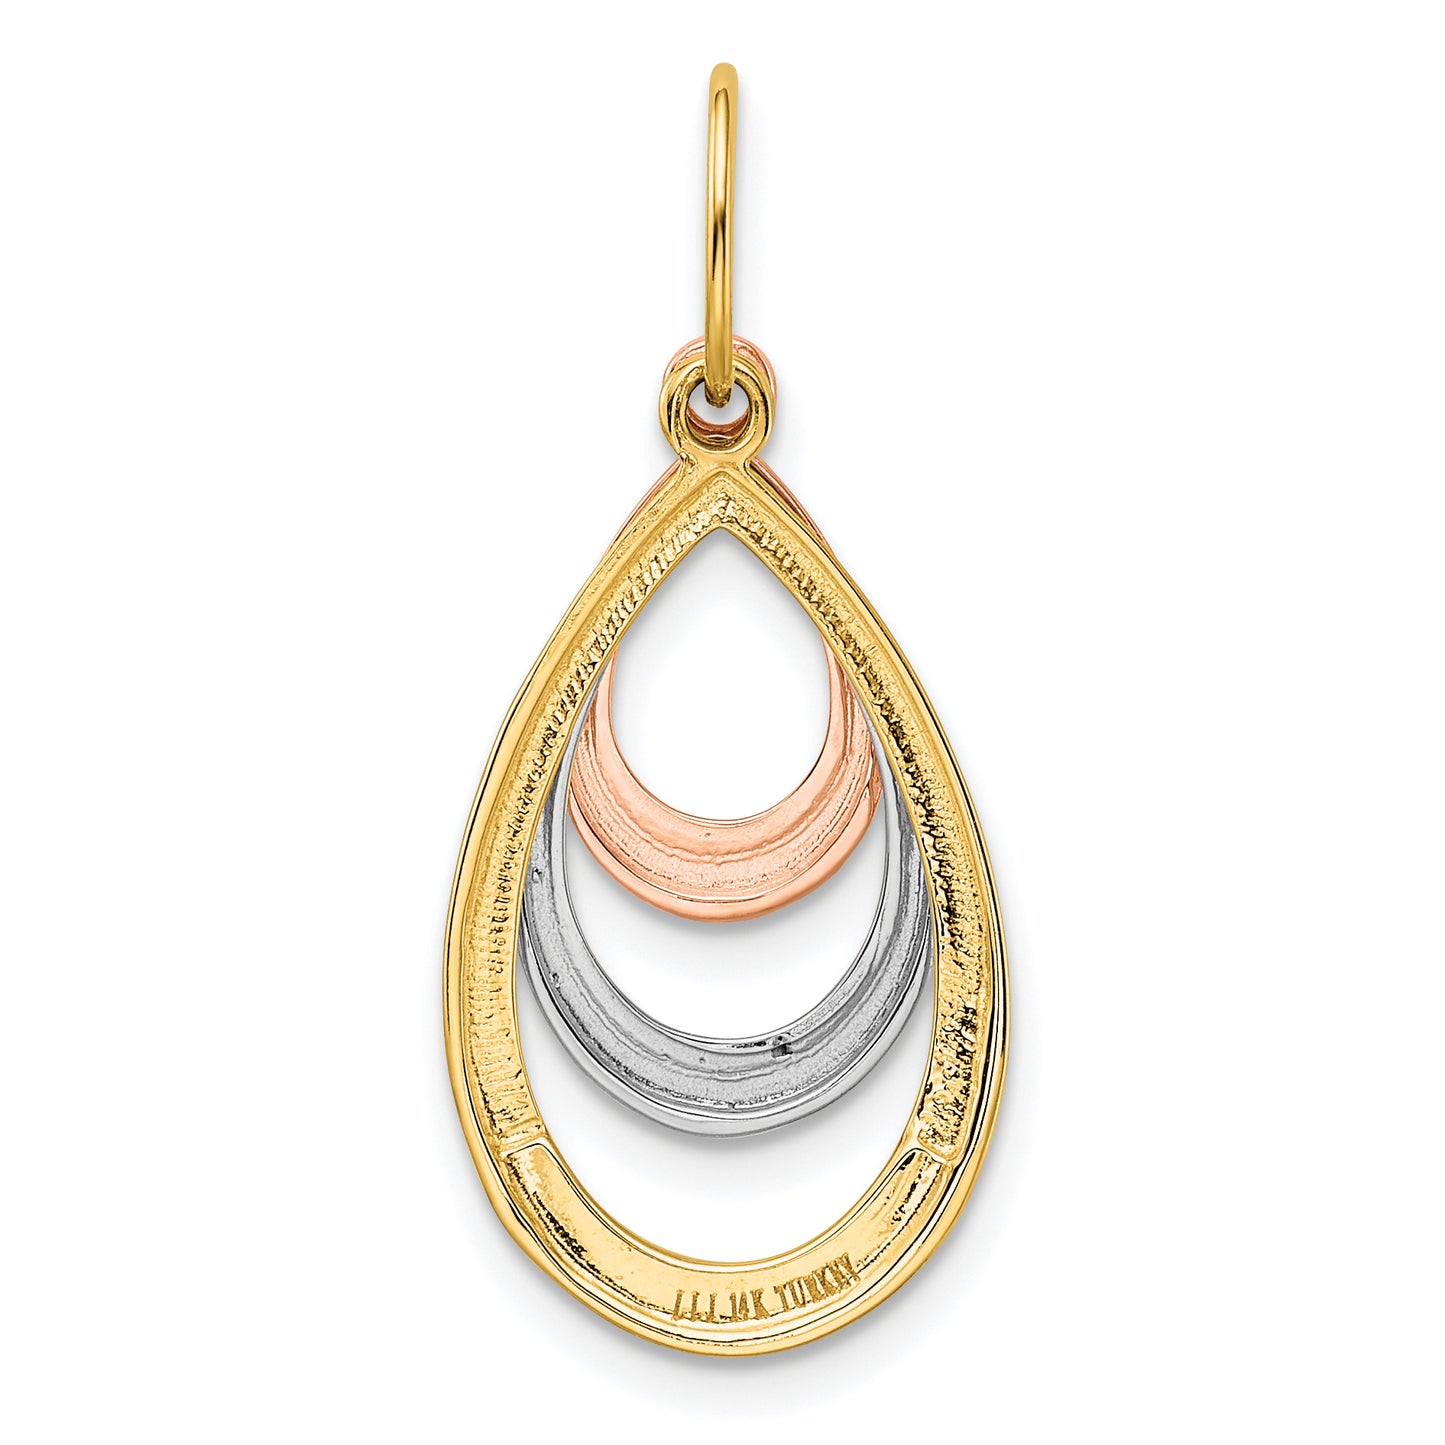 Leslie's 14K Two-tone with White Rhodium Polished Teardrop Pendant